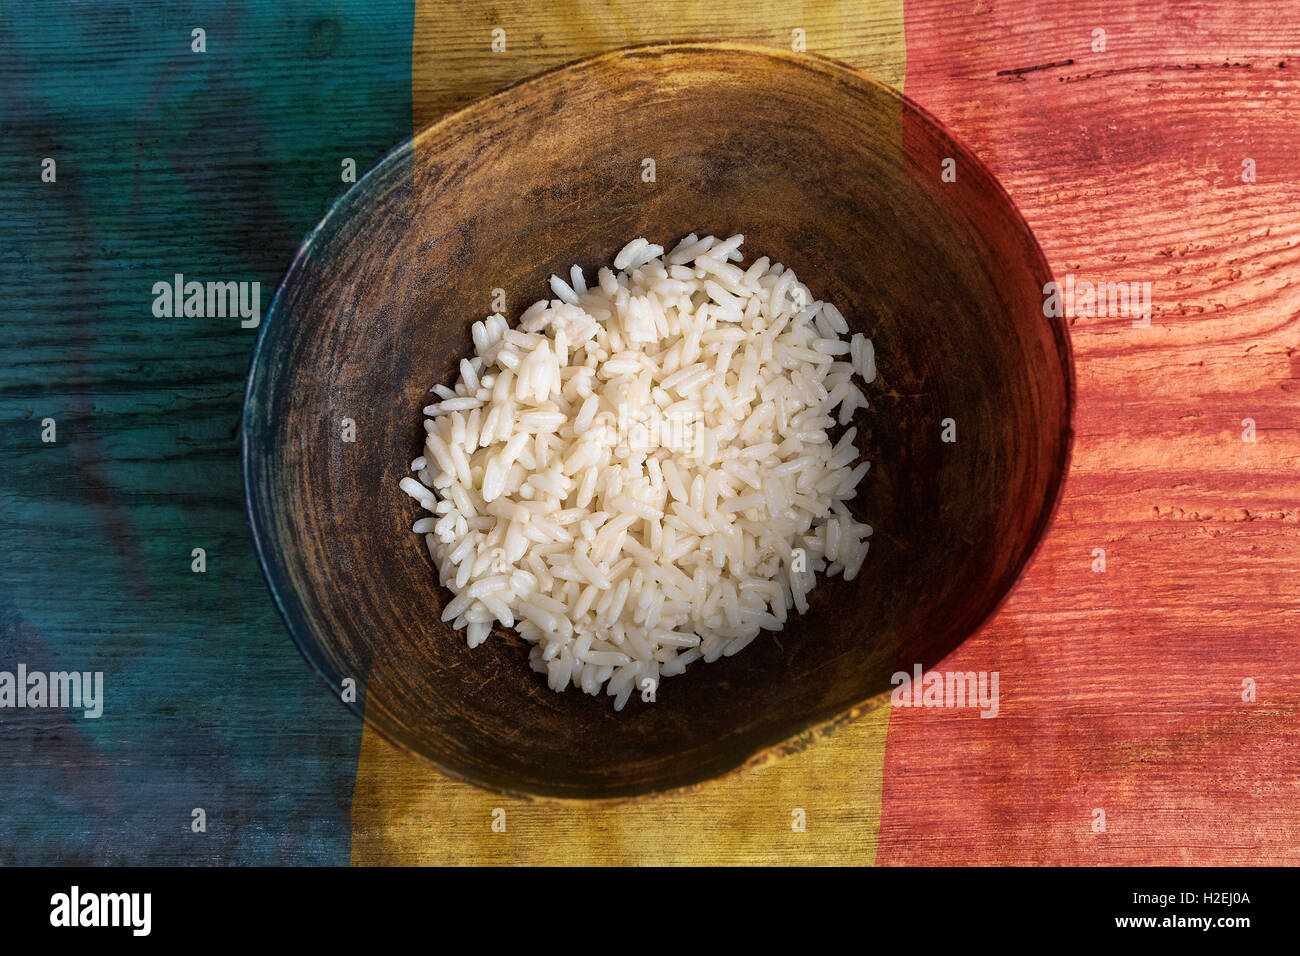 Poverty concept, bowl of rice with Romanian flag on wooden background Stock Photo